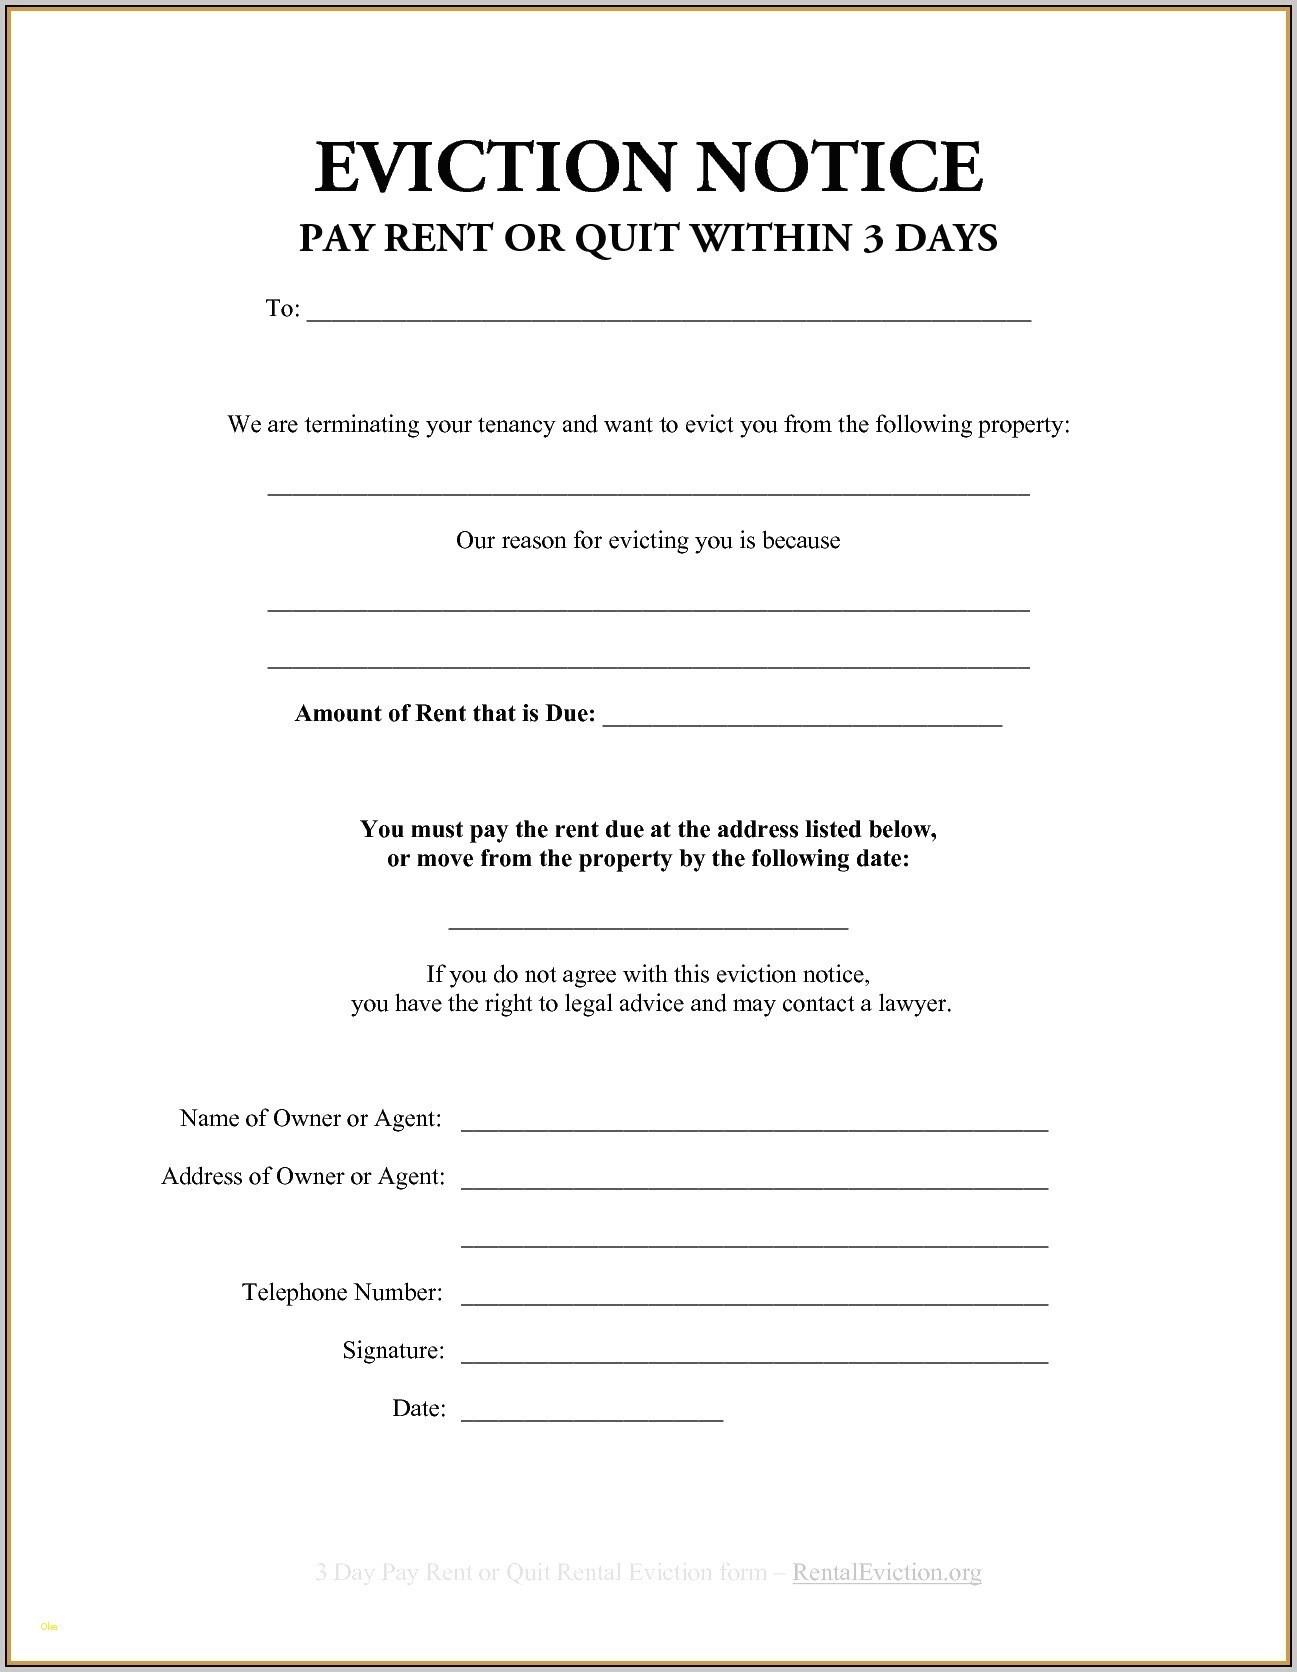 Sample Eviction Notice Letter Printable Form Template Free Notices - Free Printable Eviction Notice